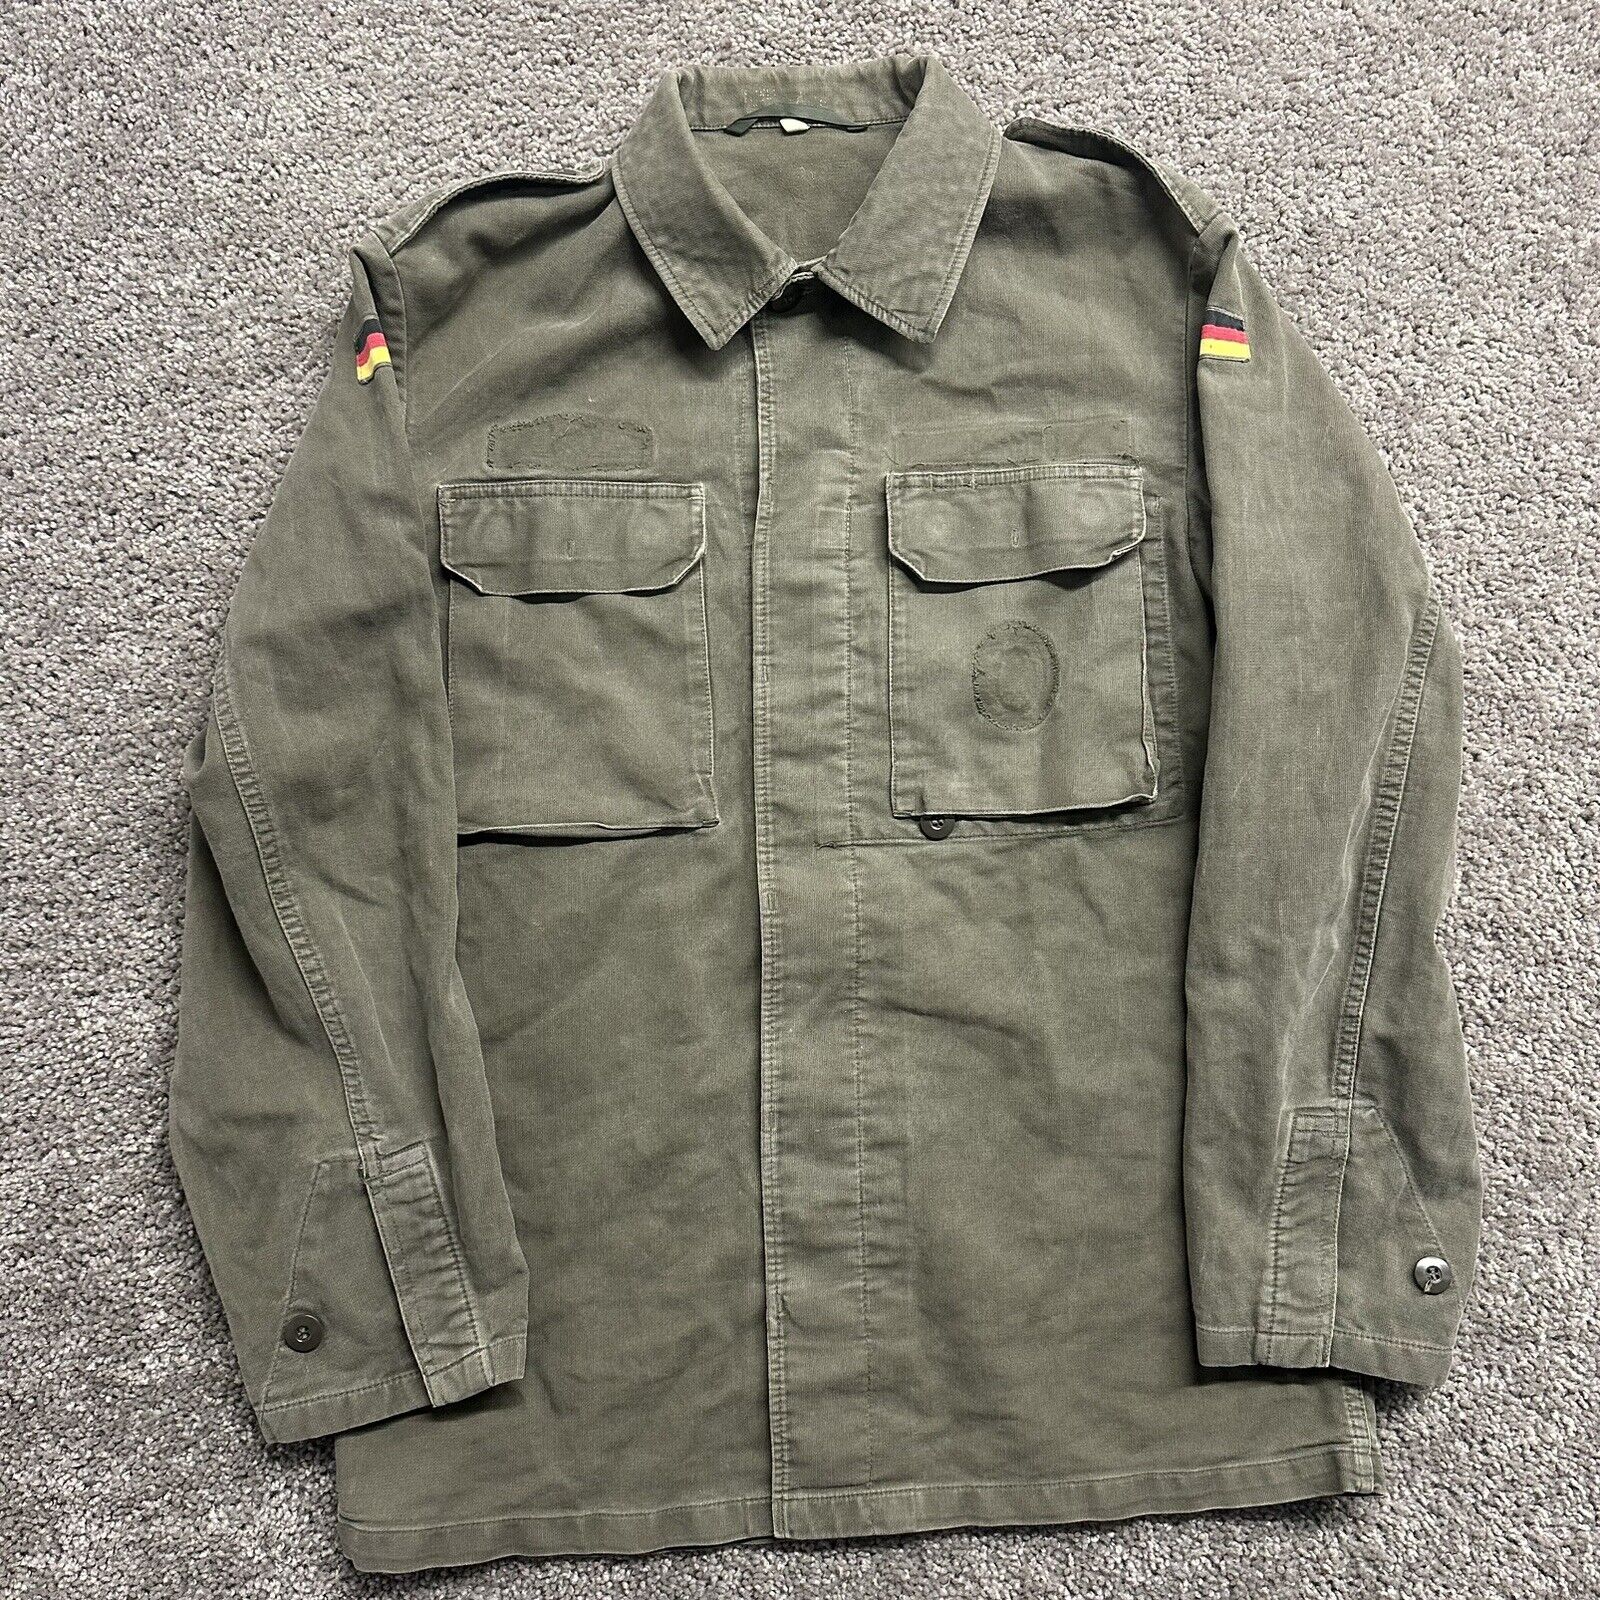 Vintage 40s/50s WWII German Military Shirt Jacket Adult Large Army patches Green